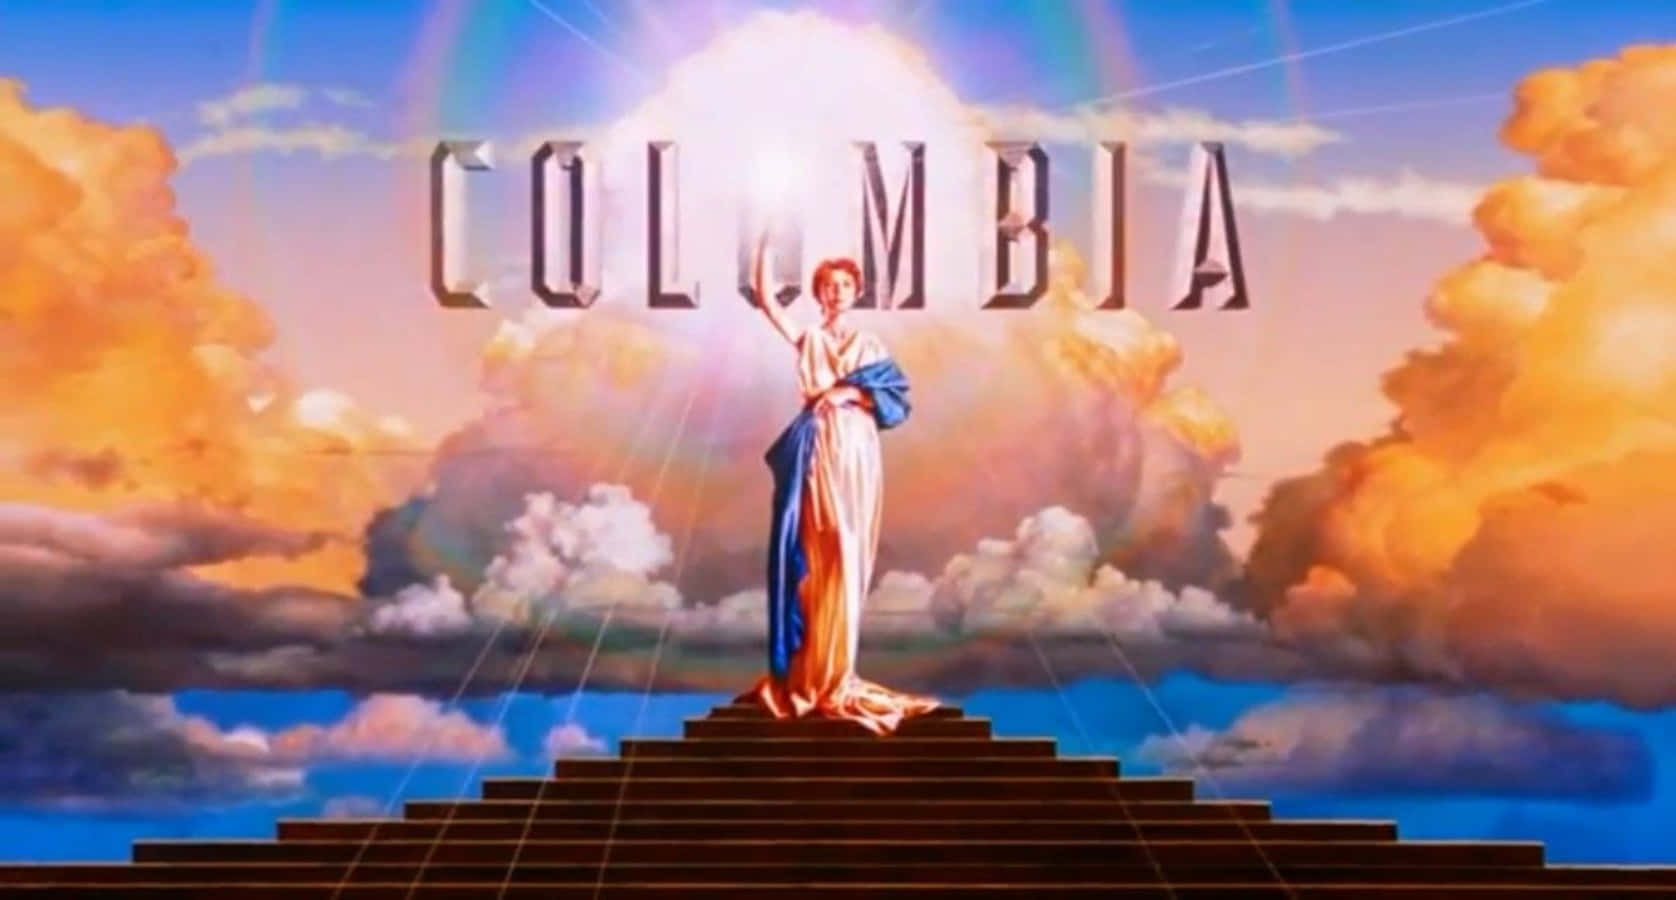 Saturated Columbia Pictures